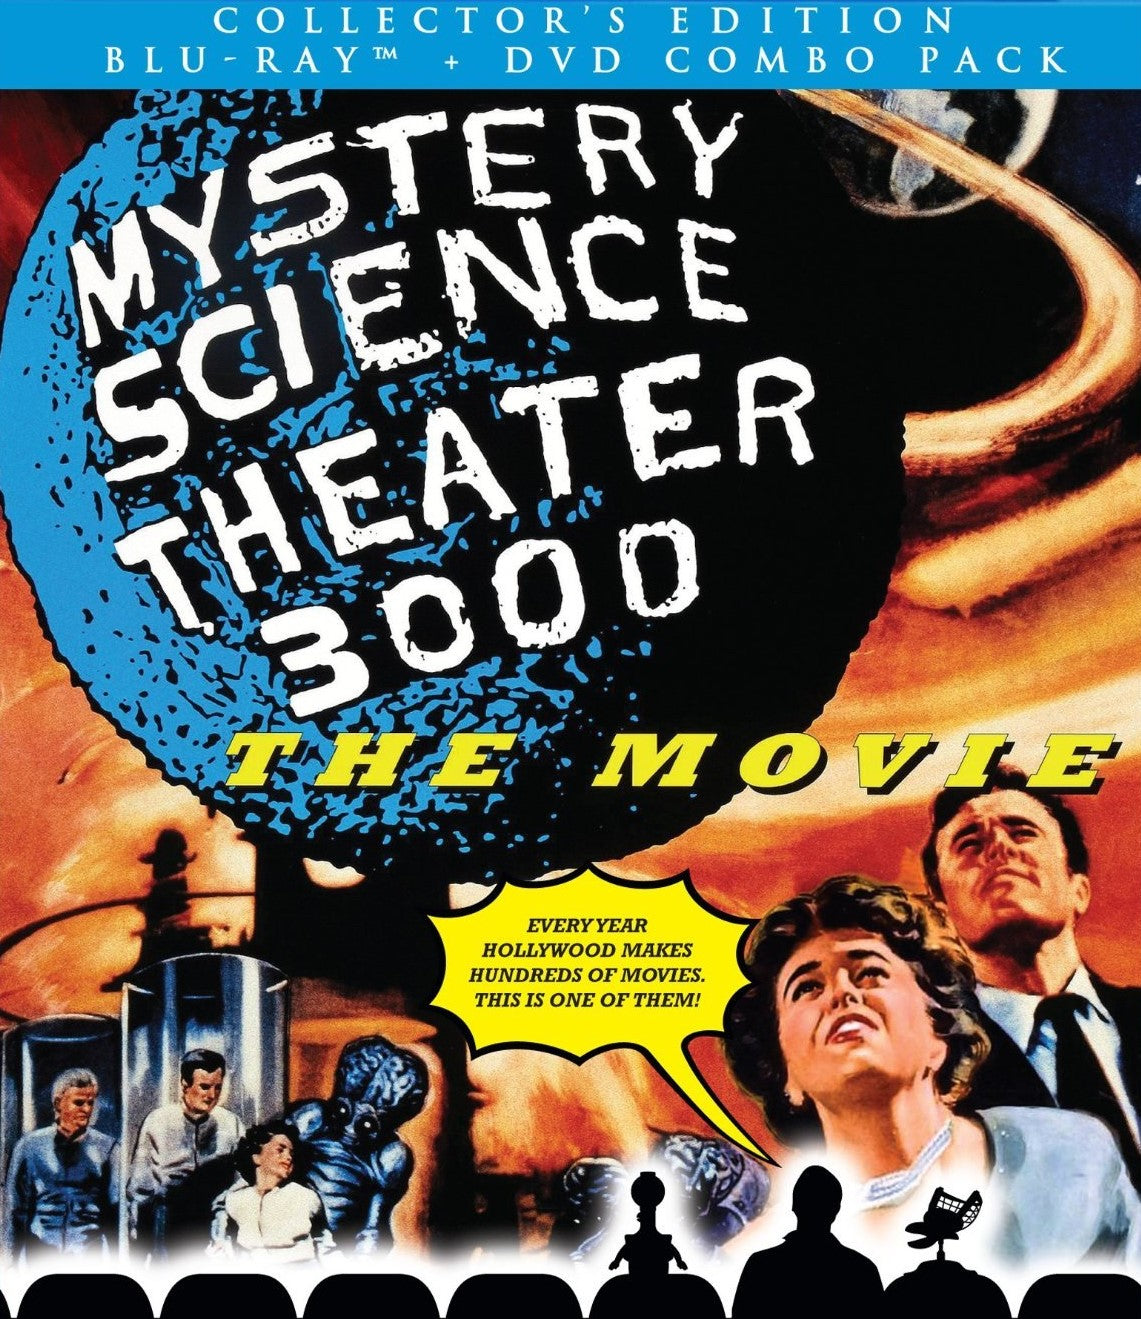 MYSTERY SCIENCE THEATER 3000: THE MOVIE (COLLECTOR'S EDITION) BLU-RAY/DVD